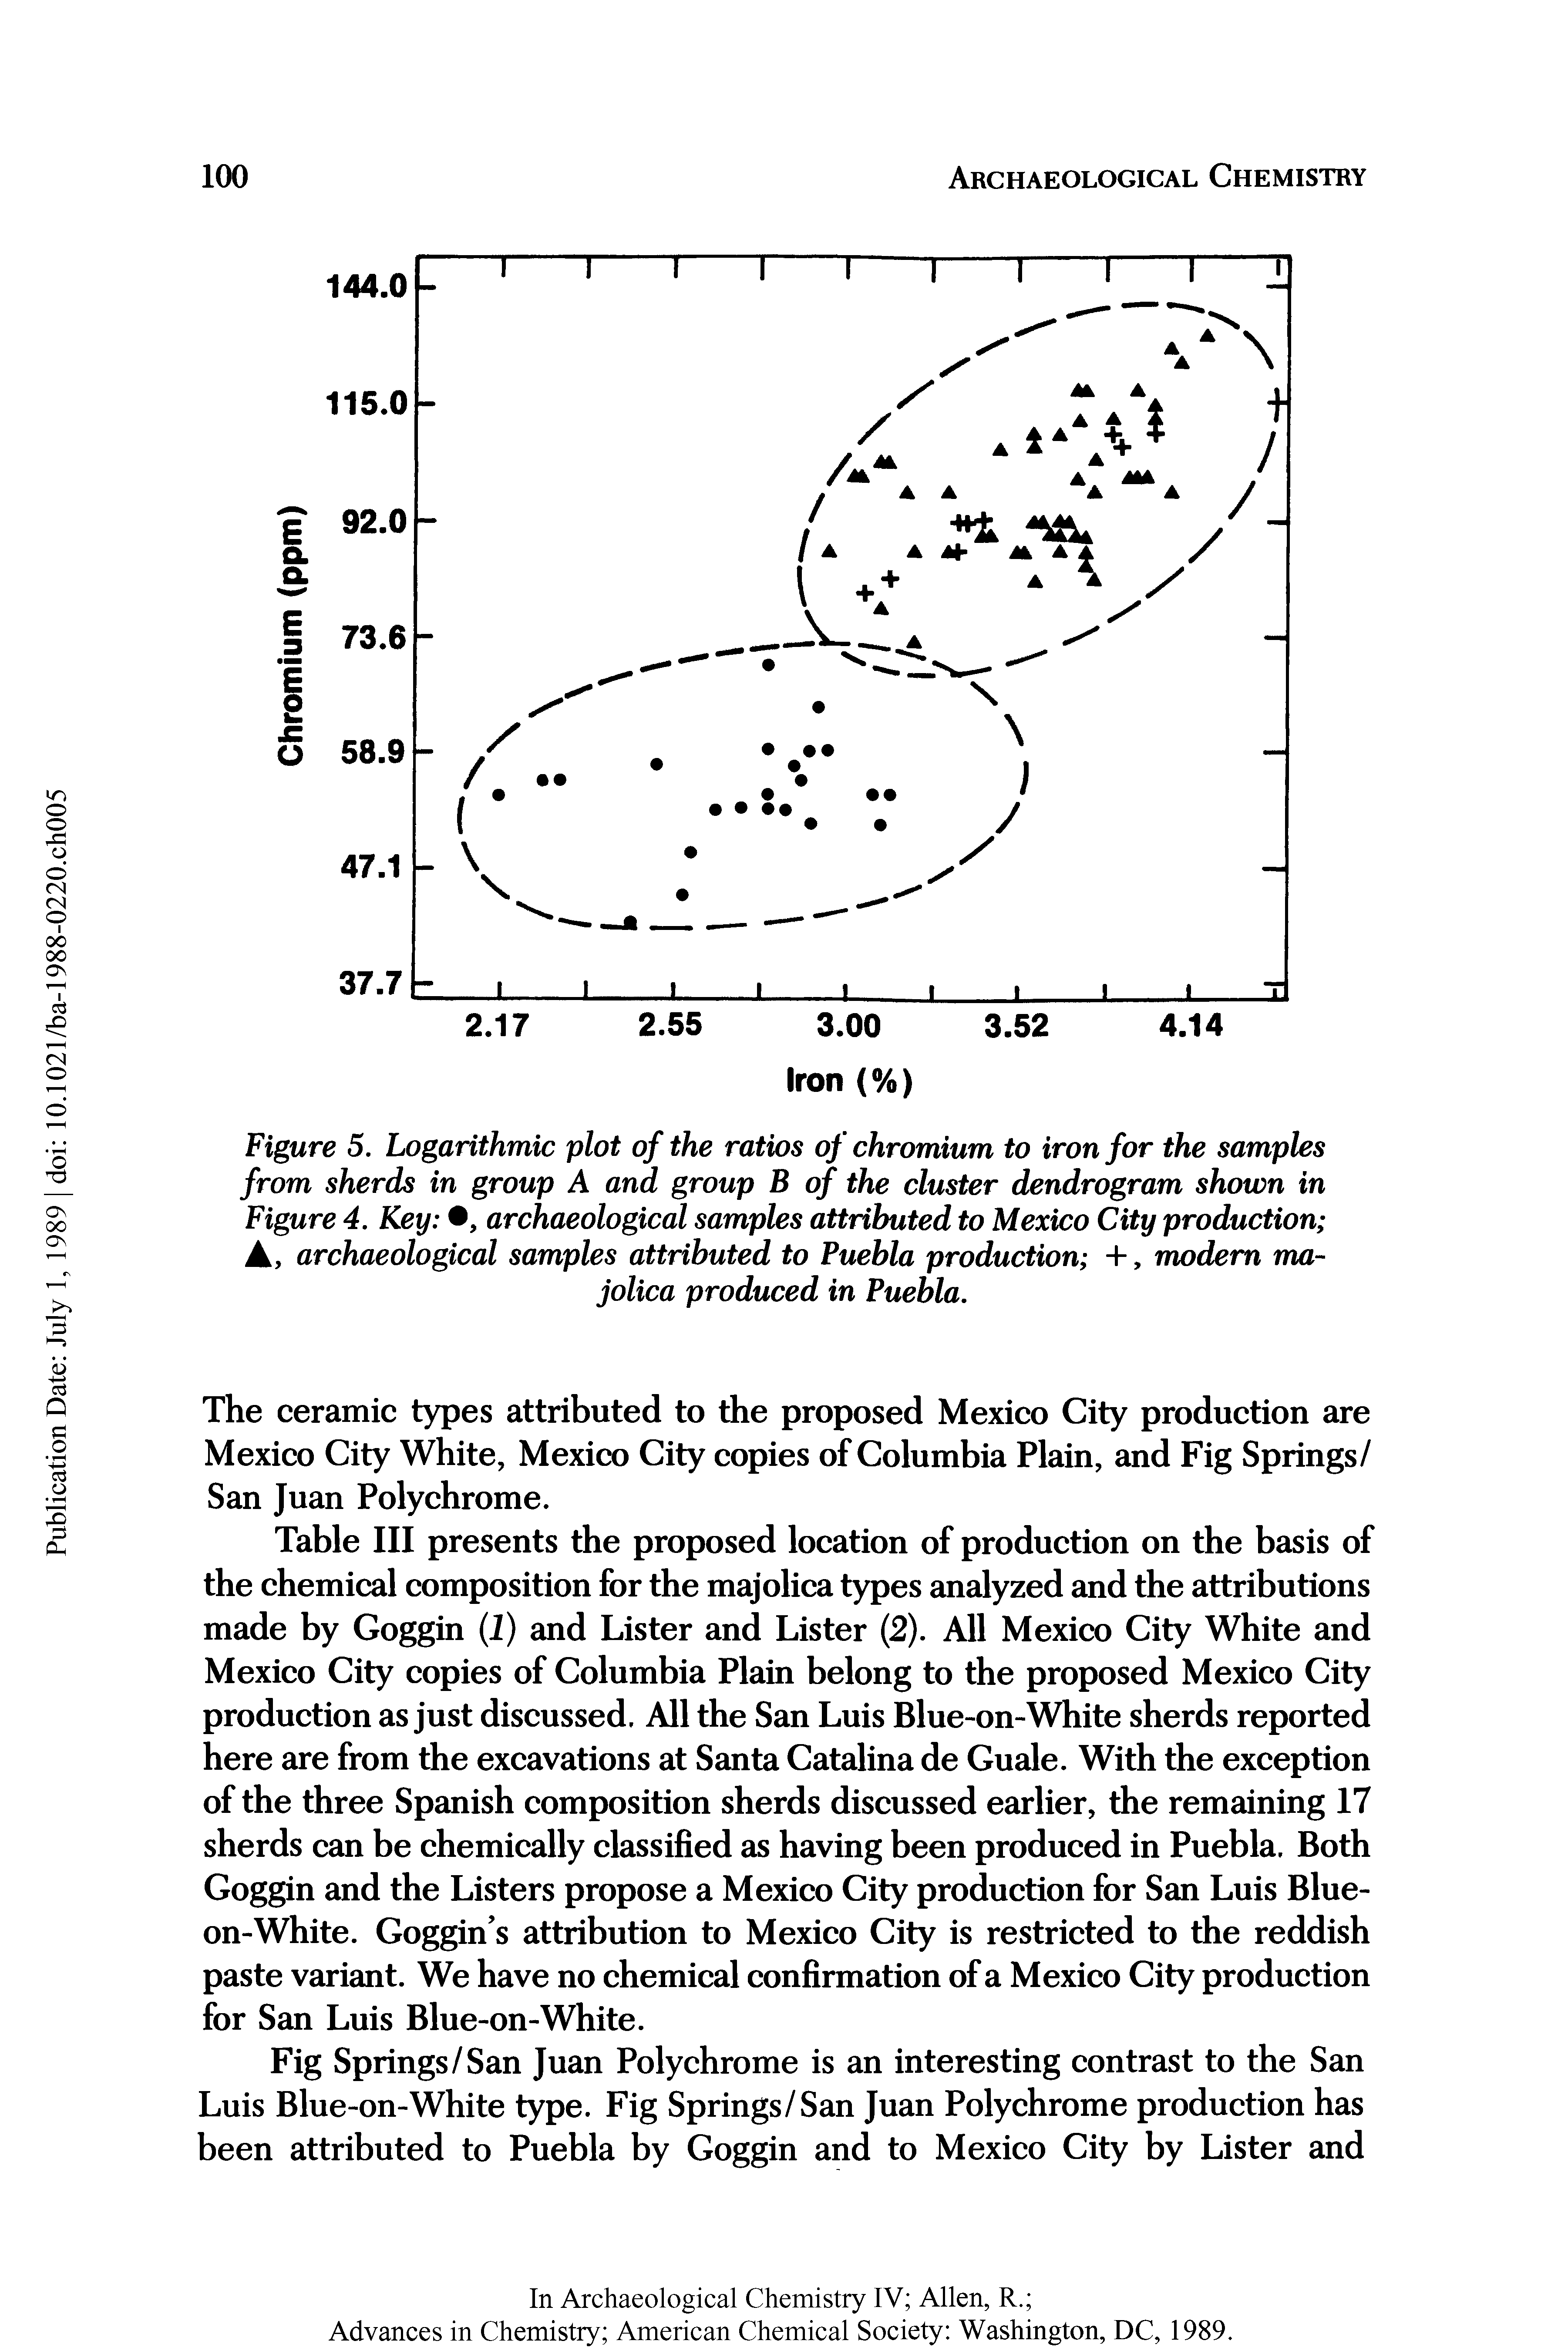 Table III presents the proposed location of production on the basis of the chemical composition for the majolica types analyzed and the attributions made by Goggin (I) and Lister and Lister (2). All Mexico City White and Mexico City copies of Columbia Plain belong to the proposed Mexico City production as just discussed. All the San Luis Blue-on-White sherds reported here are from the excavations at Santa Catalina de Guale. With the exception of the three Spanish composition sherds discussed earlier, the remaining 17 sherds can be chemically classified as having been produced in Puebla. Both Goggin and the Listers propose a Mexico City production for San Luis Blue-on-White. Goggin s attribution to Mexico City is restricted to the reddish paste variant. We have no chemical confirmation of a Mexico City production for San Luis Blue-on-White.